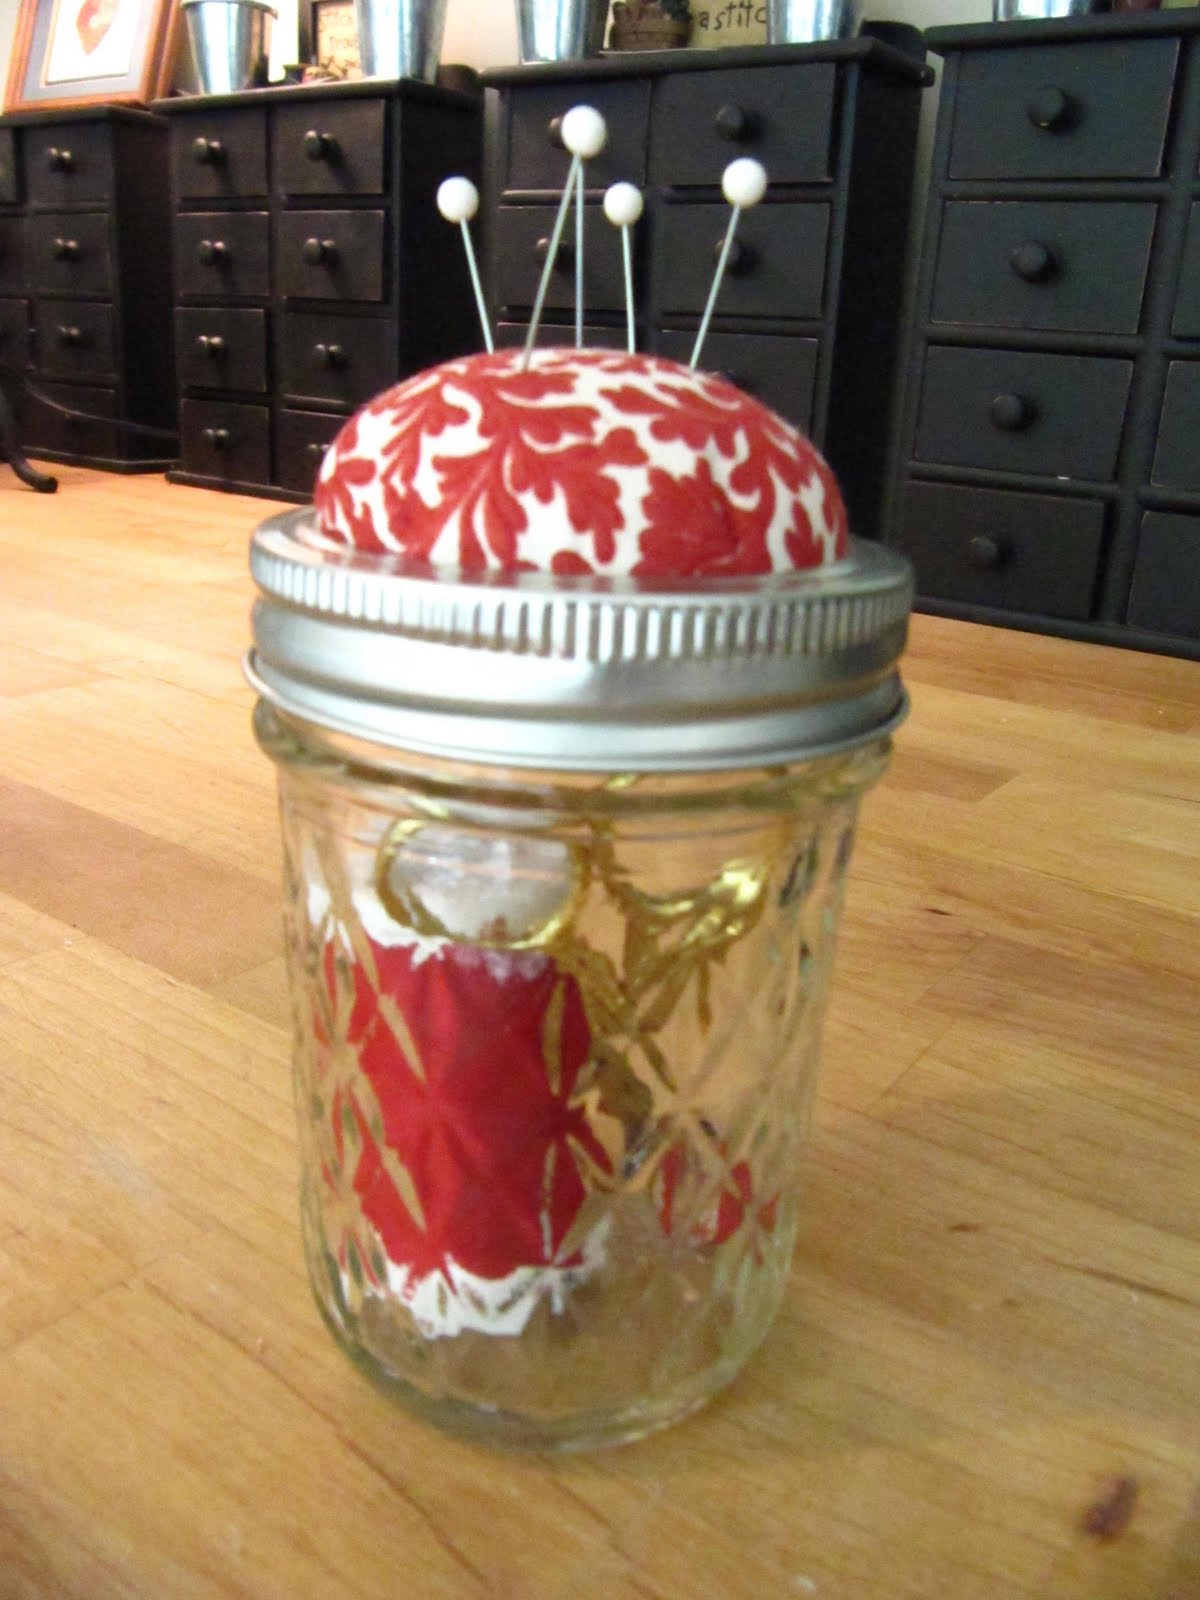 A DIY mason jar is the perfect sewing supplies storage that also saves space in a small apartment.